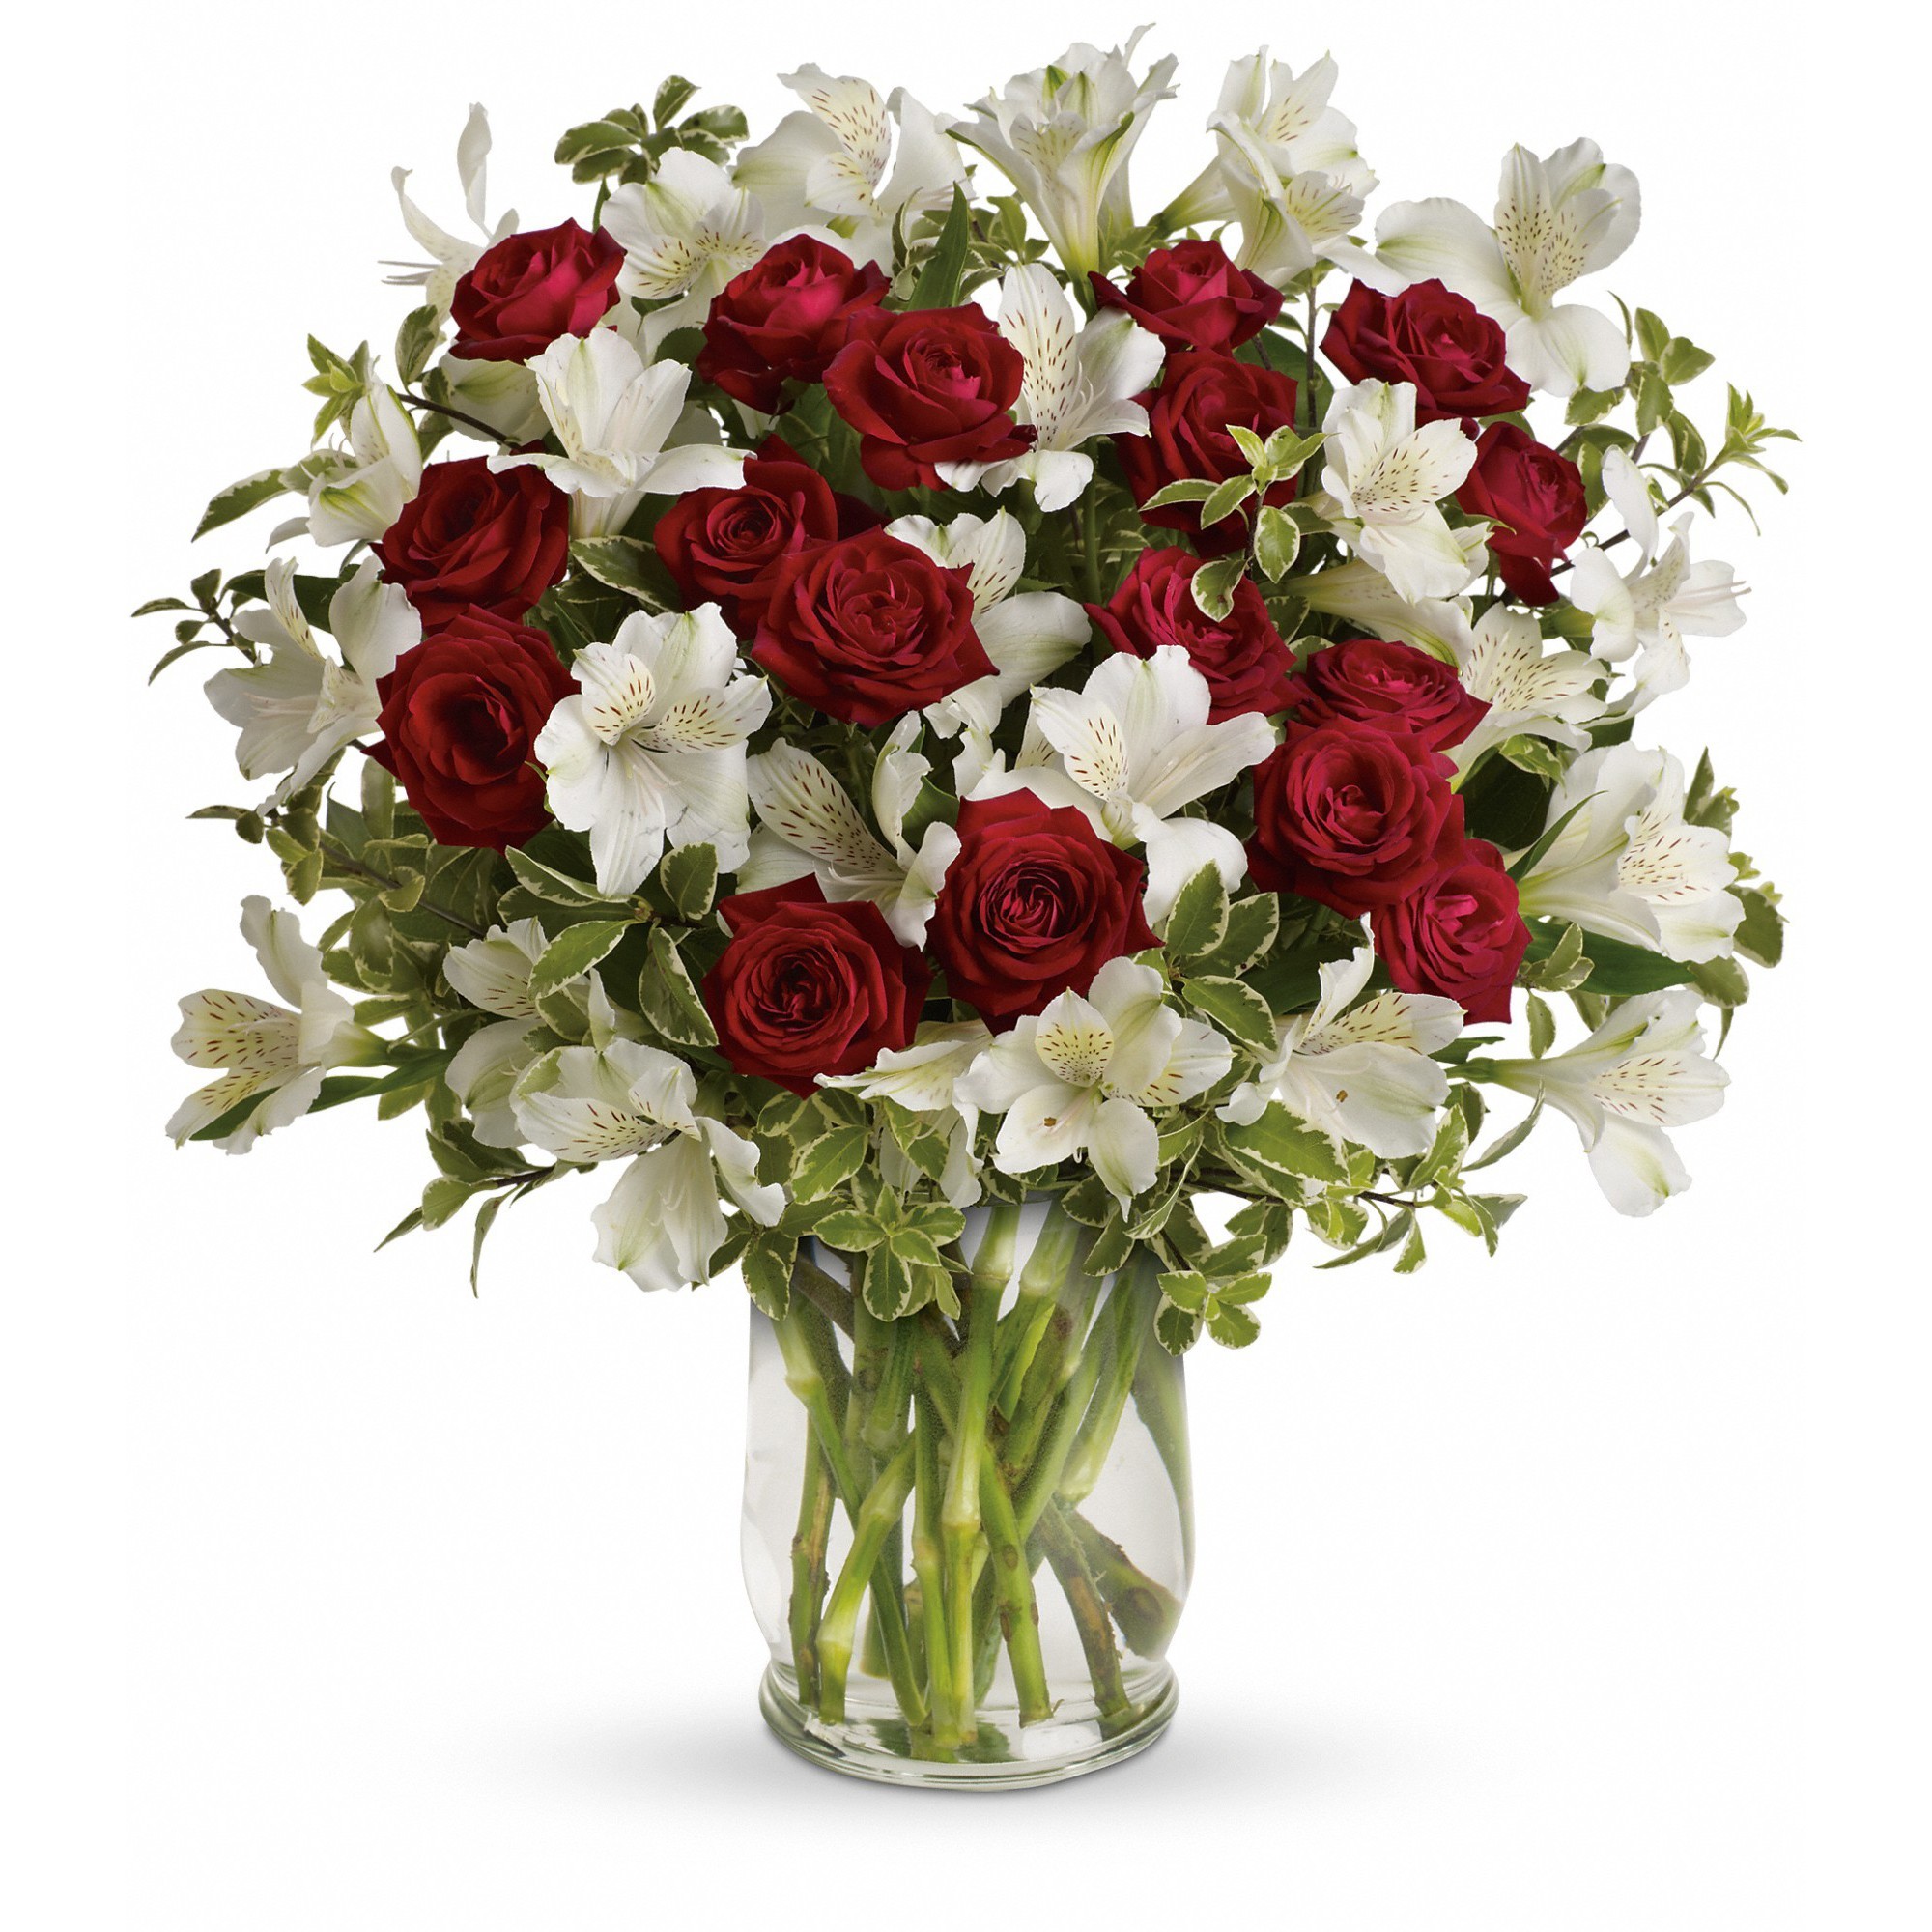 Endless Romance Bouquet by Teleflora in Pittsfield, IL | Flowers N More